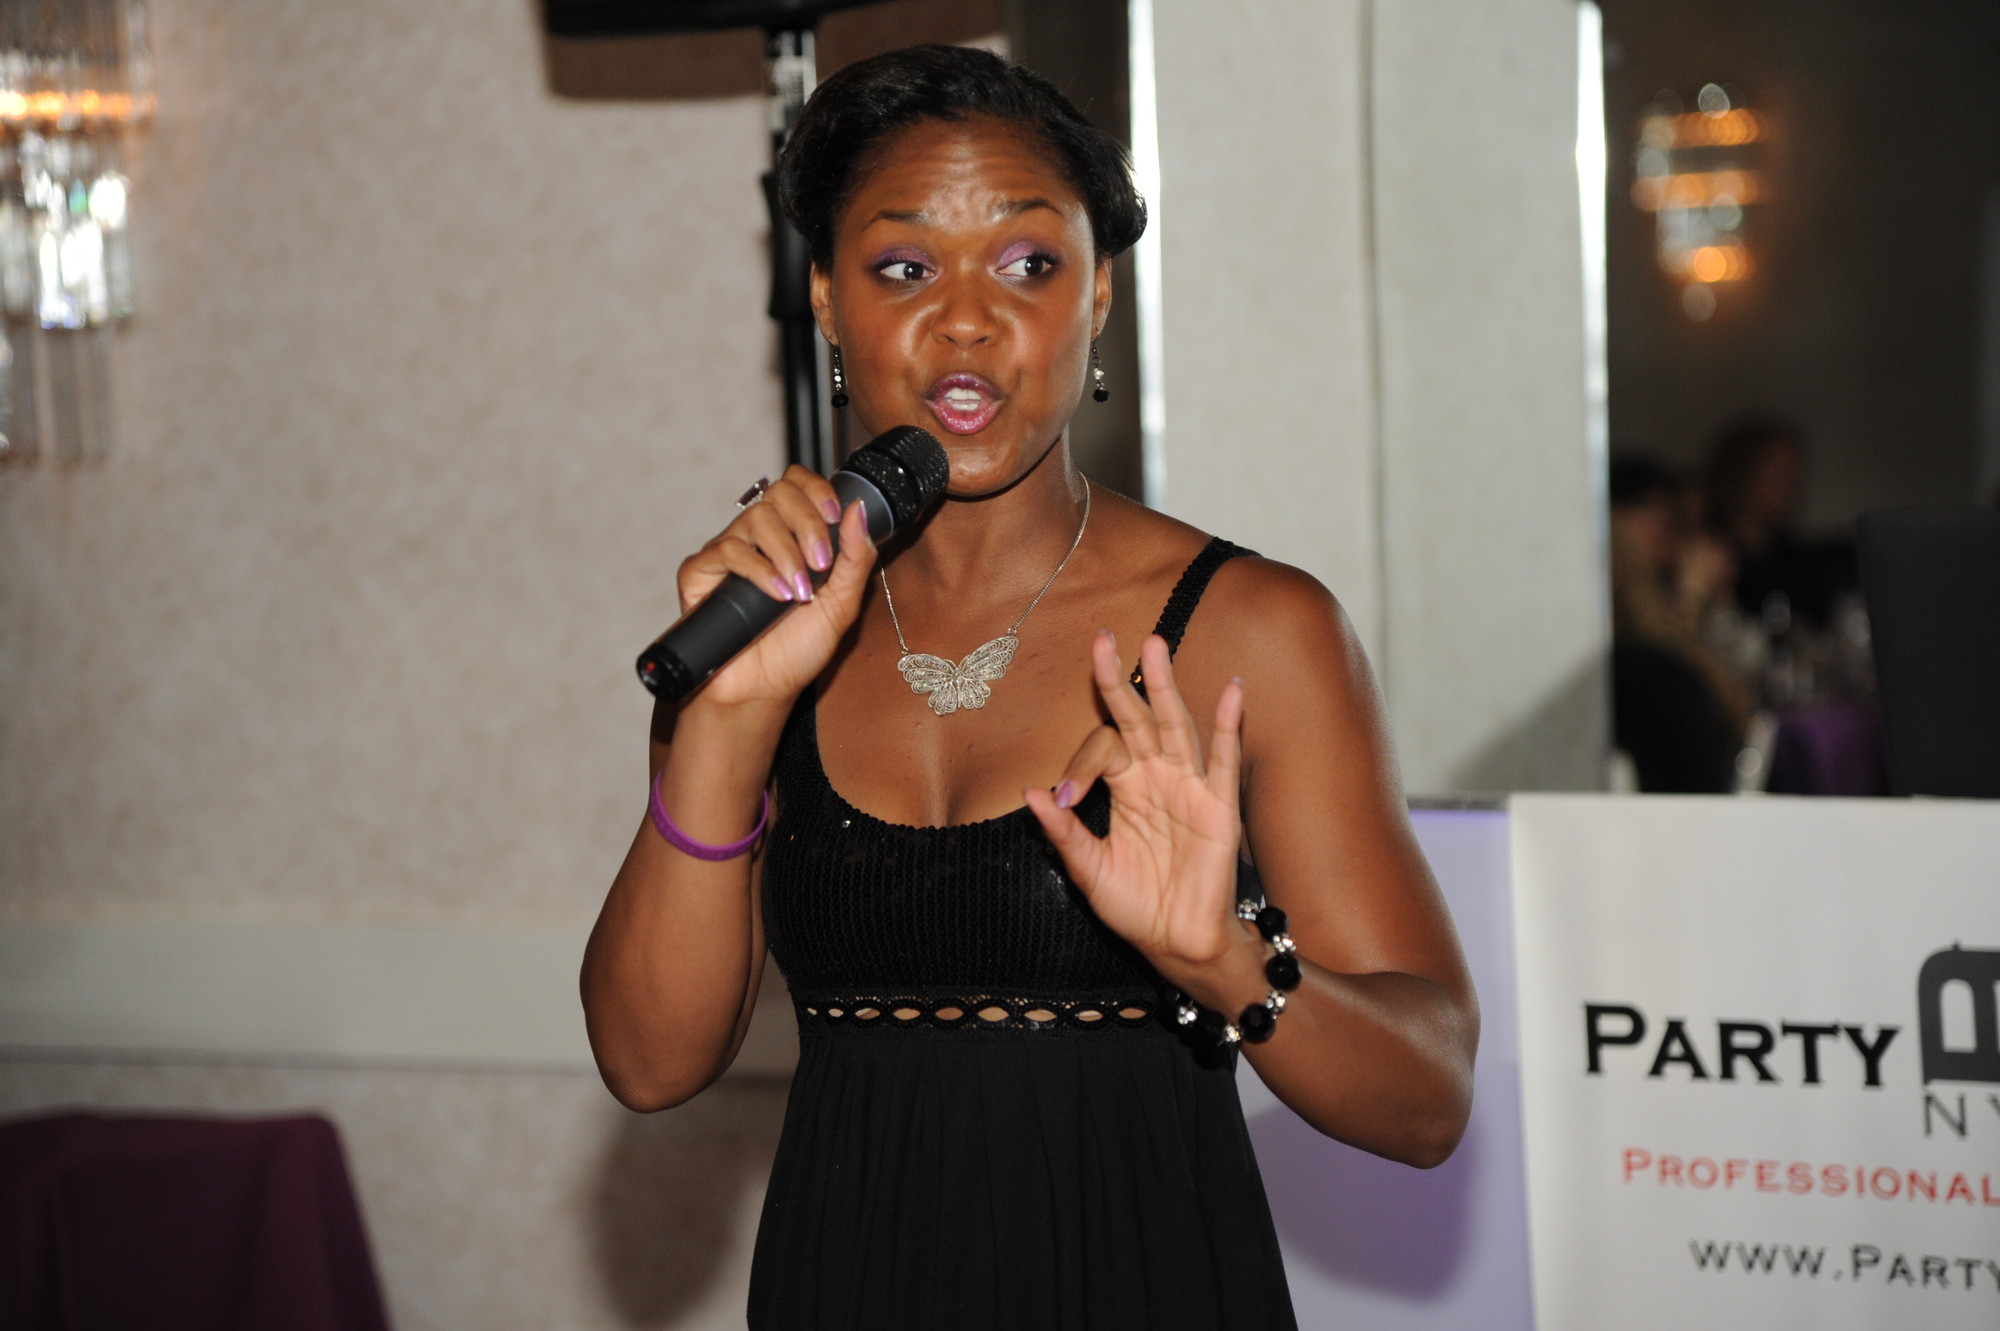 Poet Shanell Gabriel recites a poem about her experiences with lupus